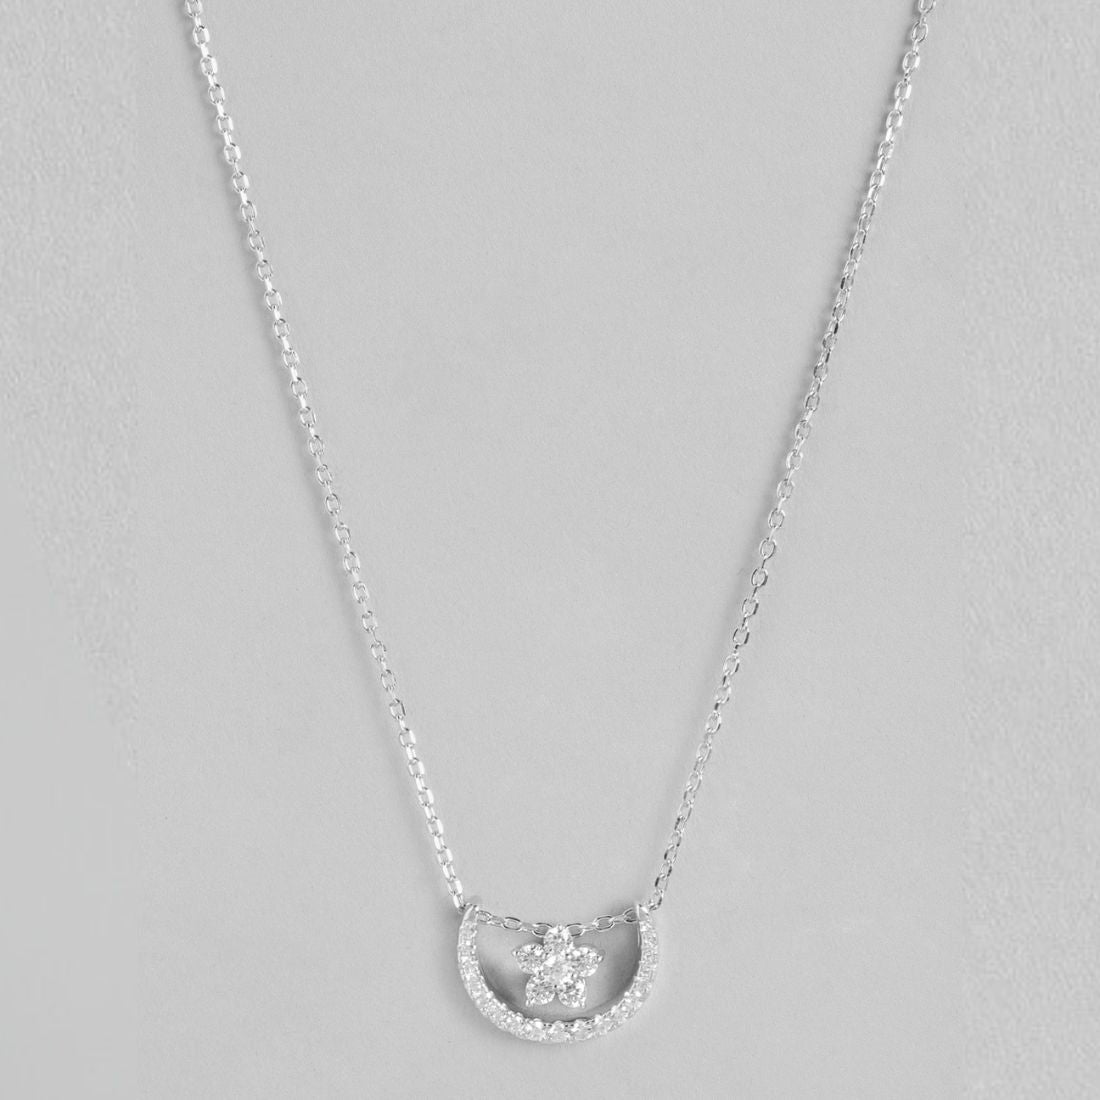 Celestial Radiance CZ Charm Rhodium-Plated 925 Sterling Silver Necklace